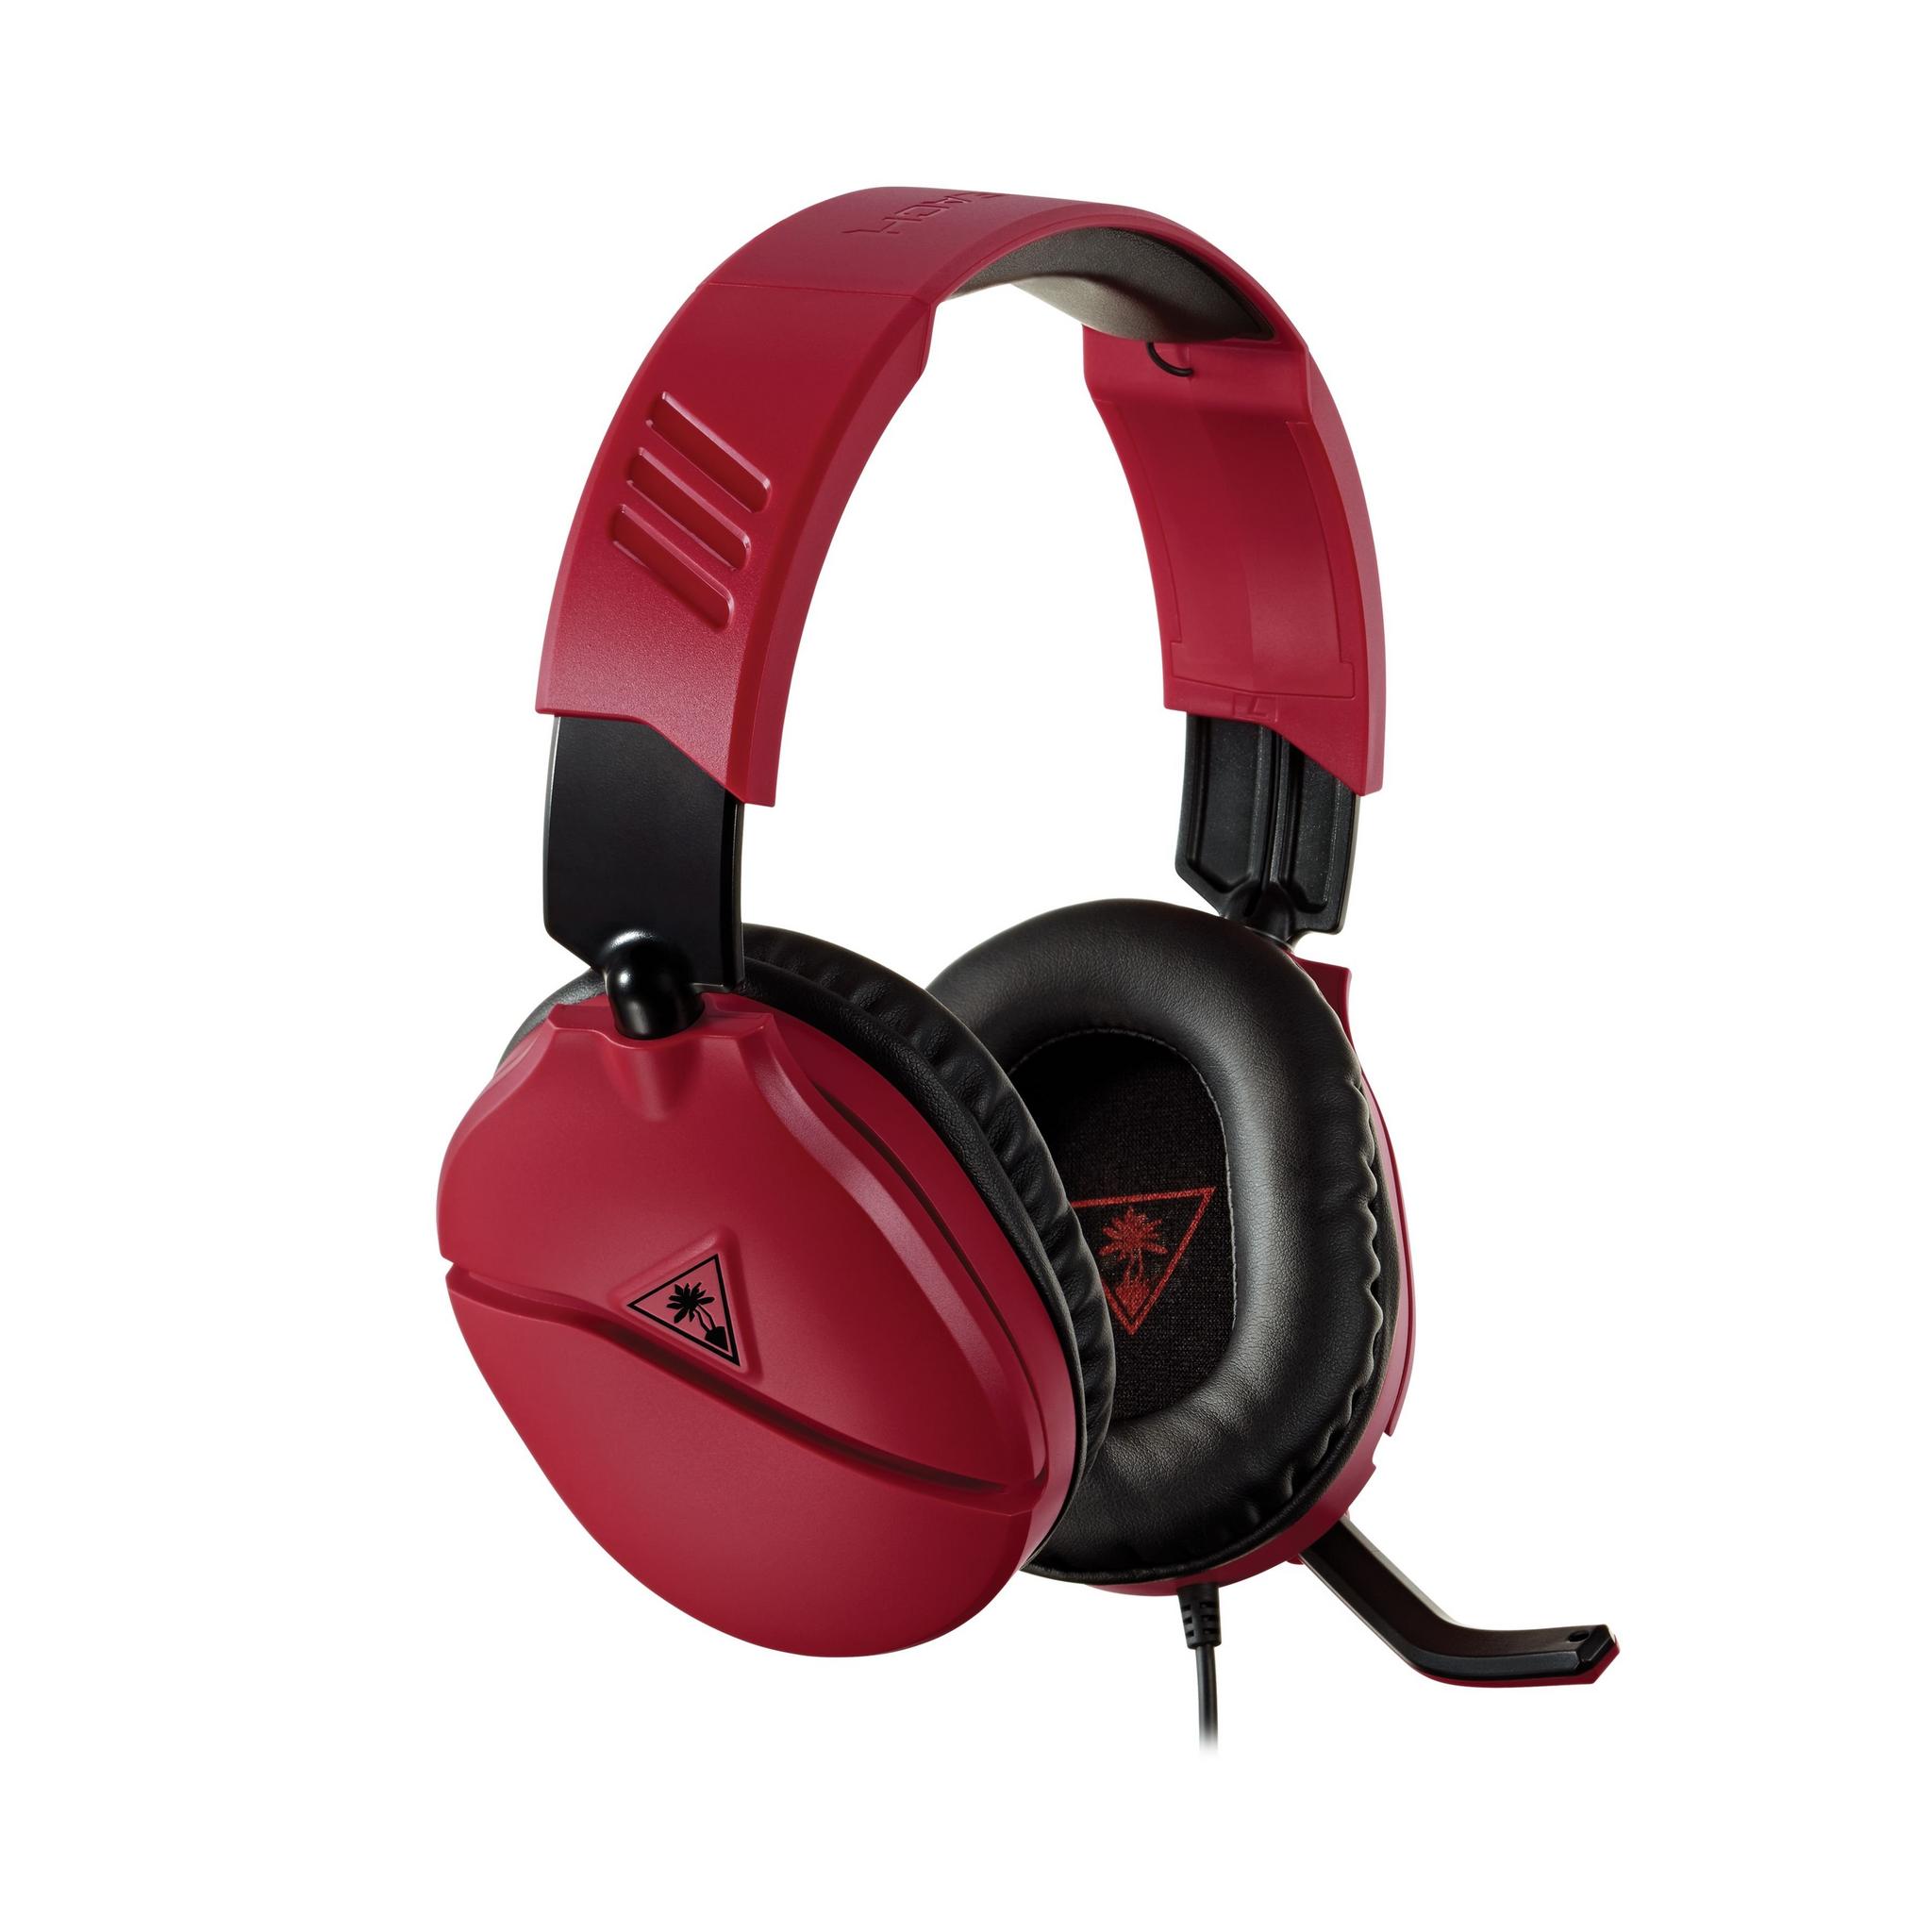 Turtlebeach Recon 70 Gaming Headset - Red